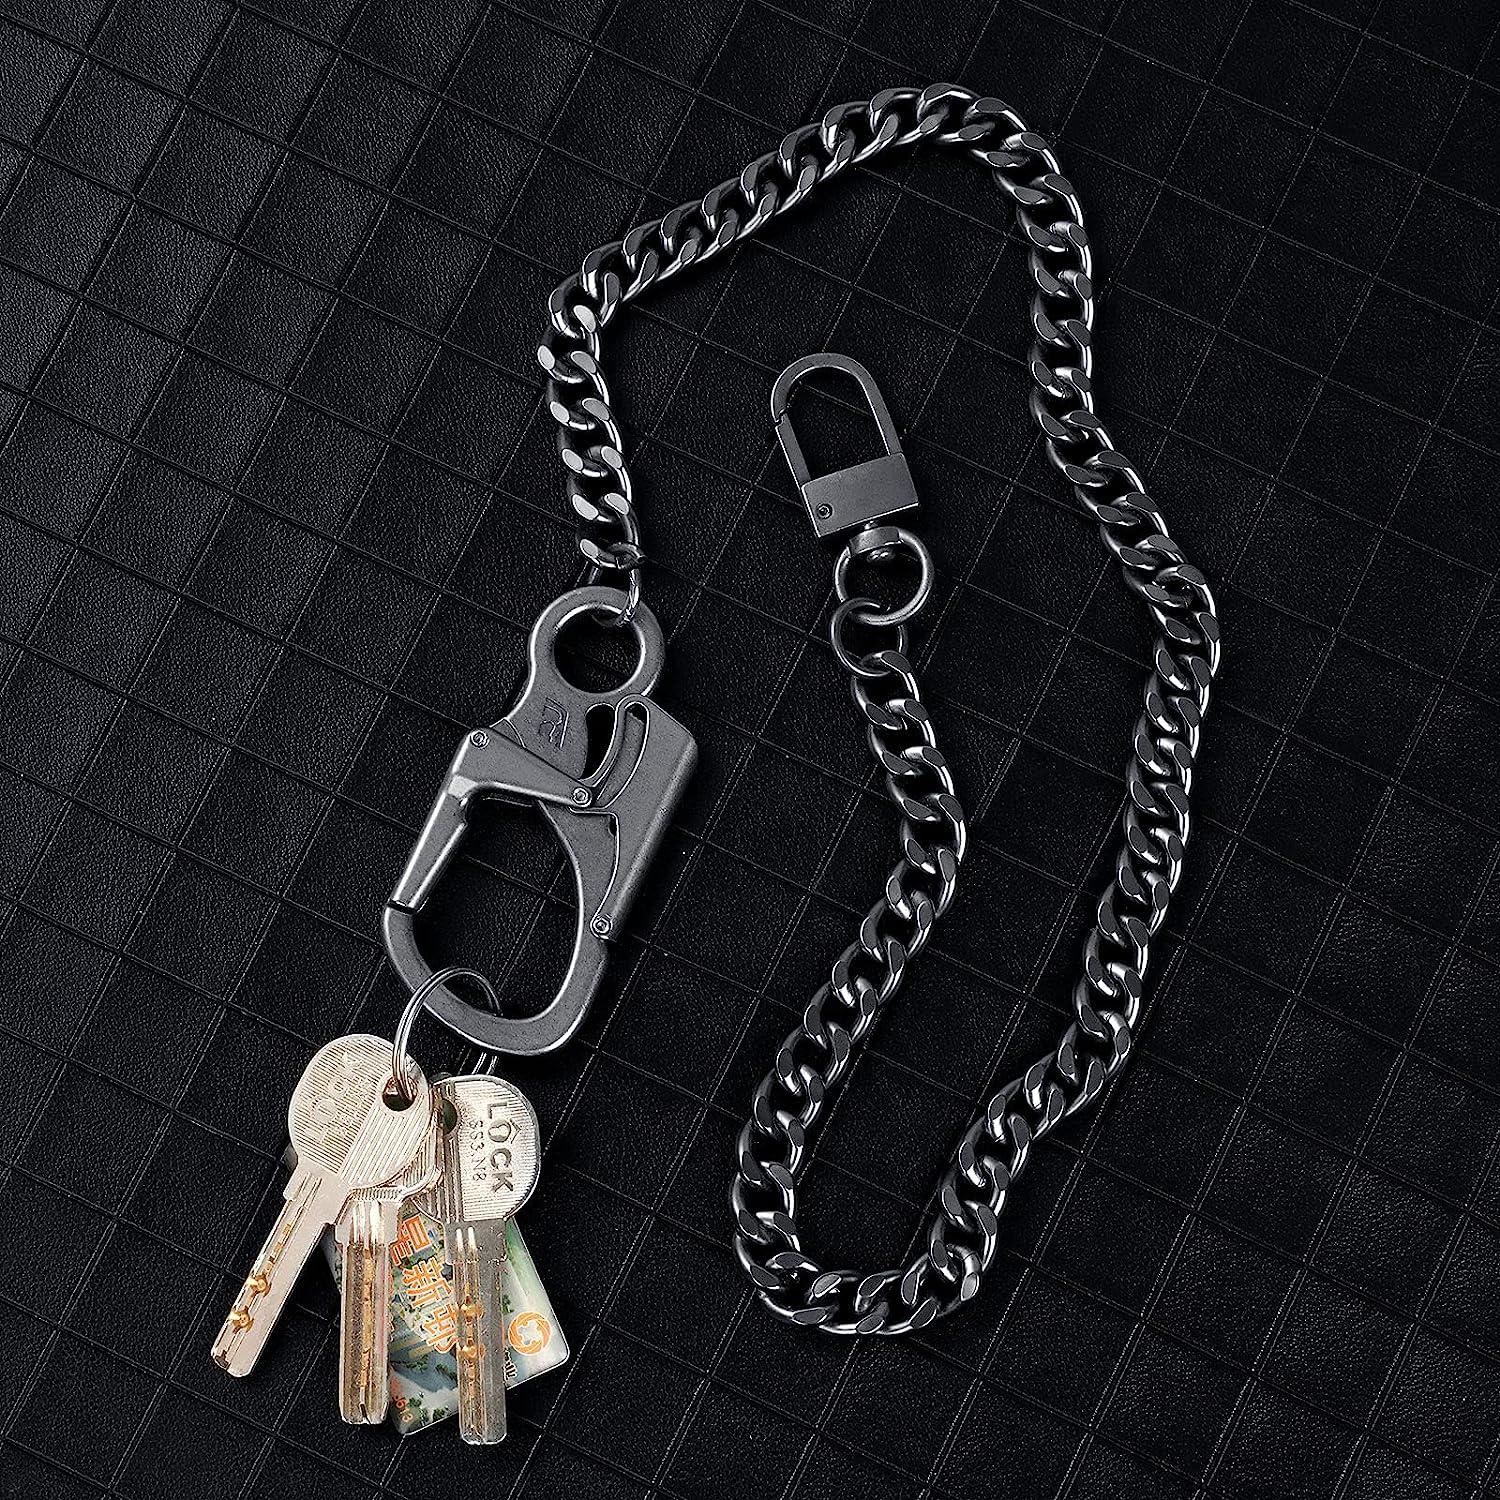 Wallet Chain, Heavy Duty Pocket Chain with Round Clasp, Men Chains